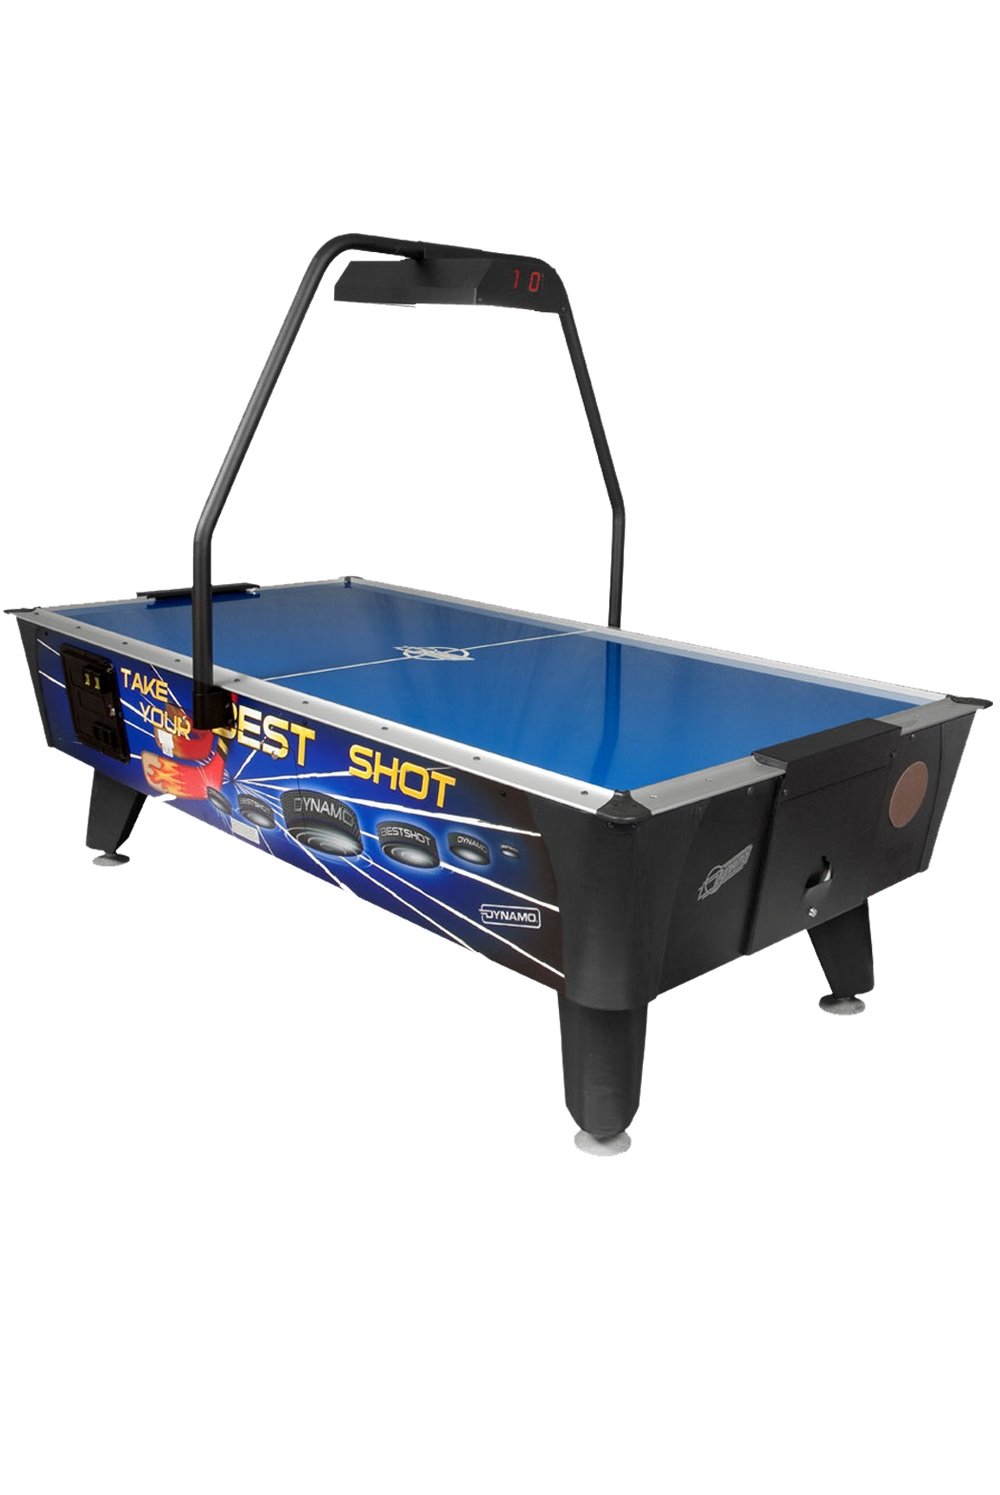 Dynamo 8' Best Shot Air Hockey Table with Overhead Scoring (Coin)